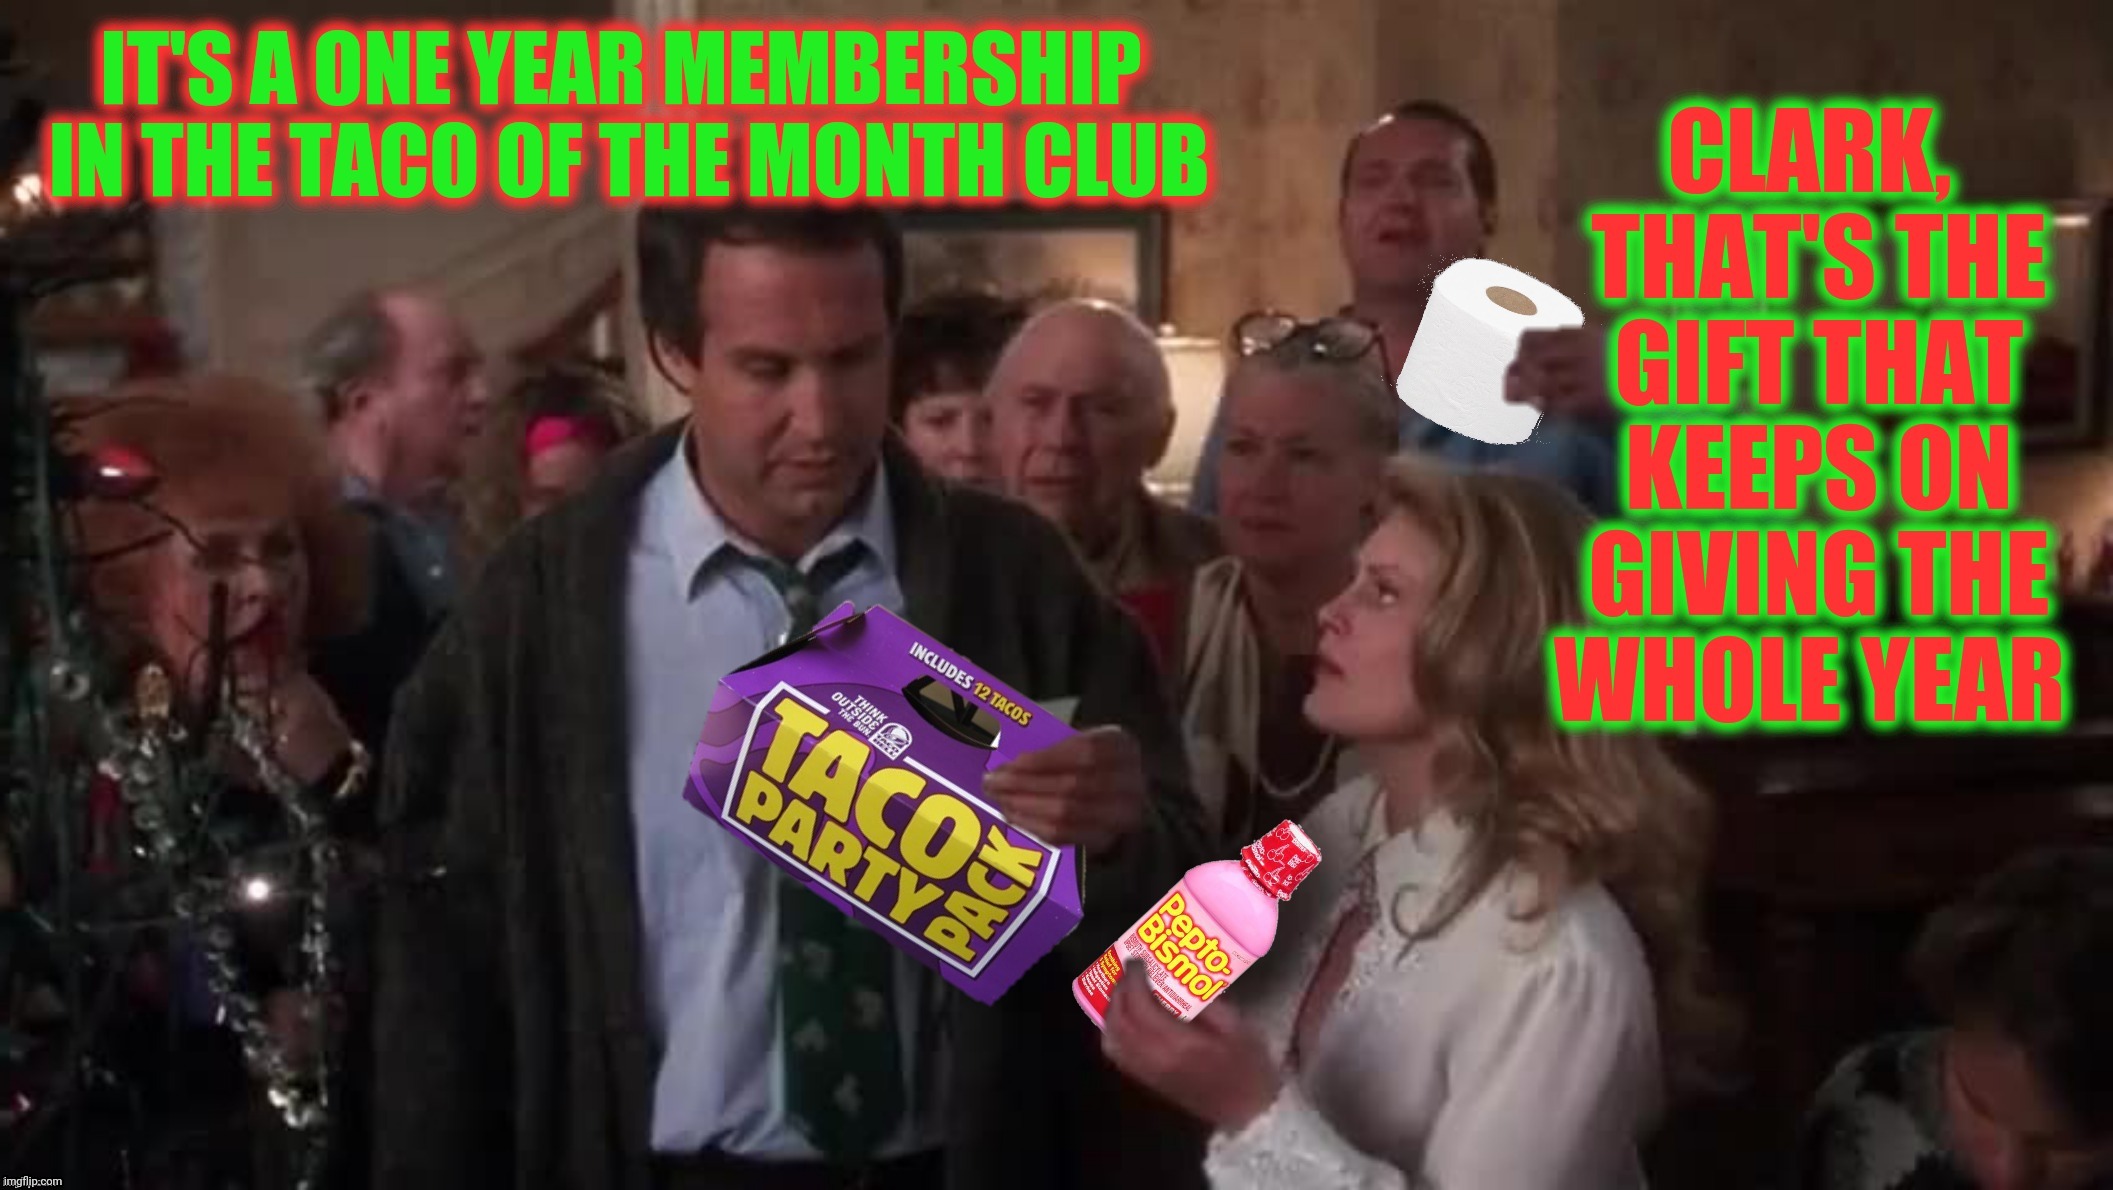 Bad Photoshop Sunday presents:  That it is Edward, that it is | image tagged in bad photoshop,christmas vacation,taco bell,taco of the month club | made w/ Imgflip meme maker